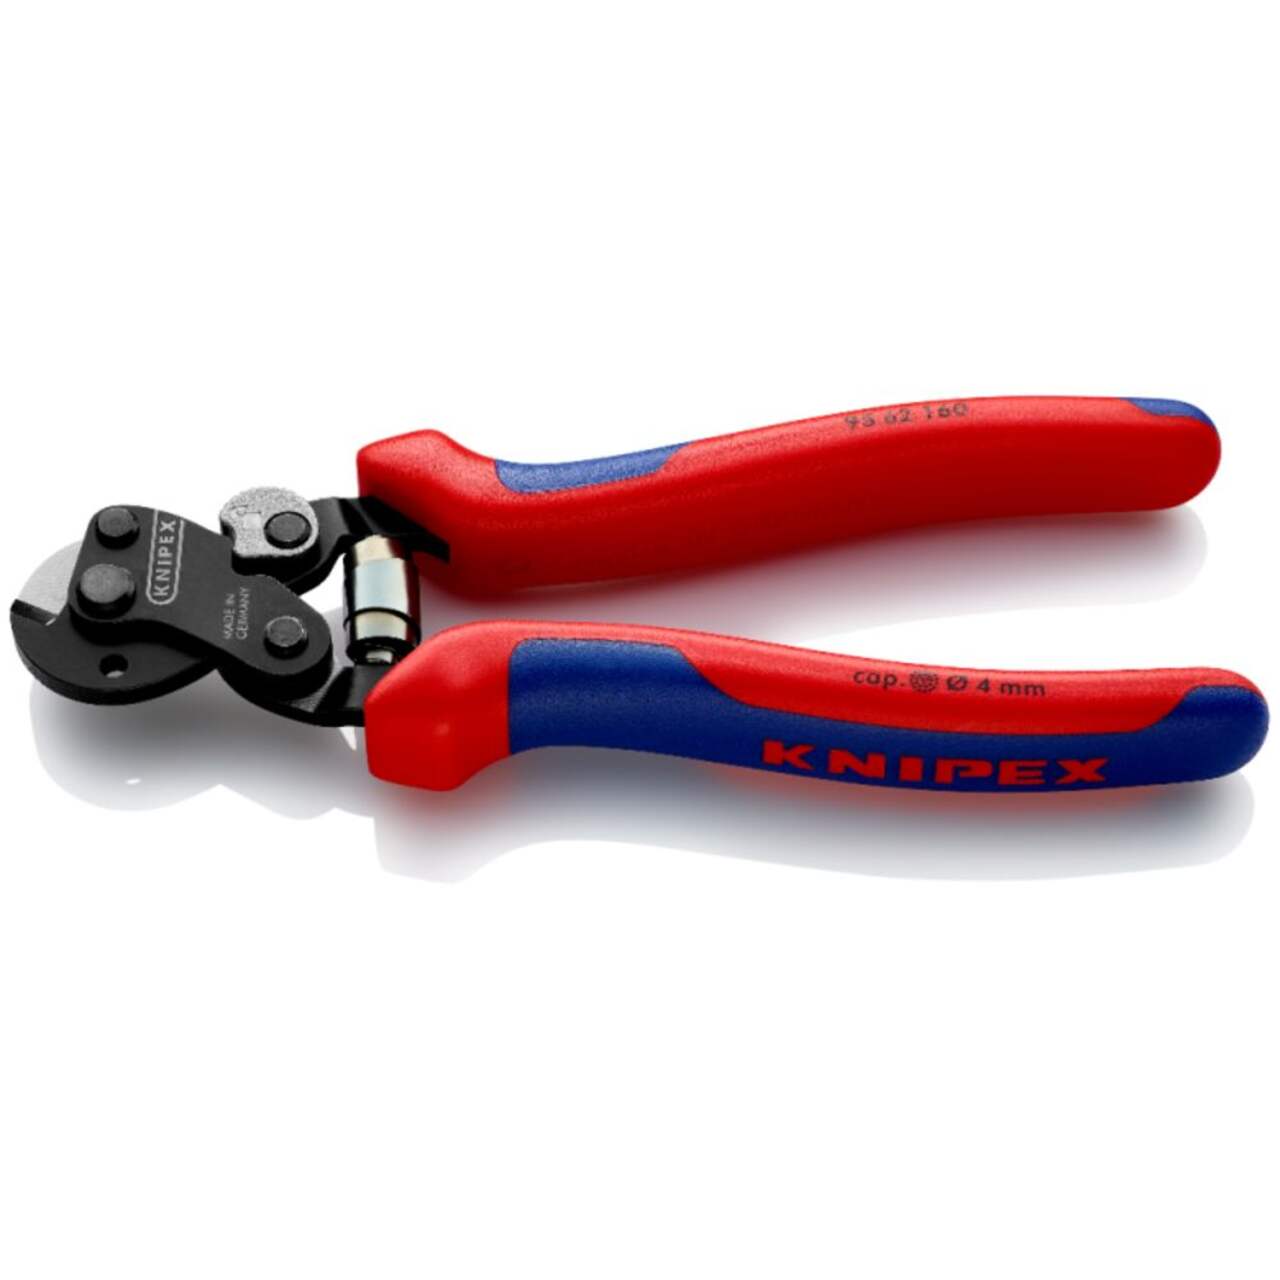 https://media-www.canadiantire.ca/product/fixing/tools/metal-working/0586898/knipex-wire-rope-cutter-64591de8-29fc-4856-98cc-bab4b2b368d2-jpgrendition.jpg?imdensity=1&imwidth=640&impolicy=mZoom